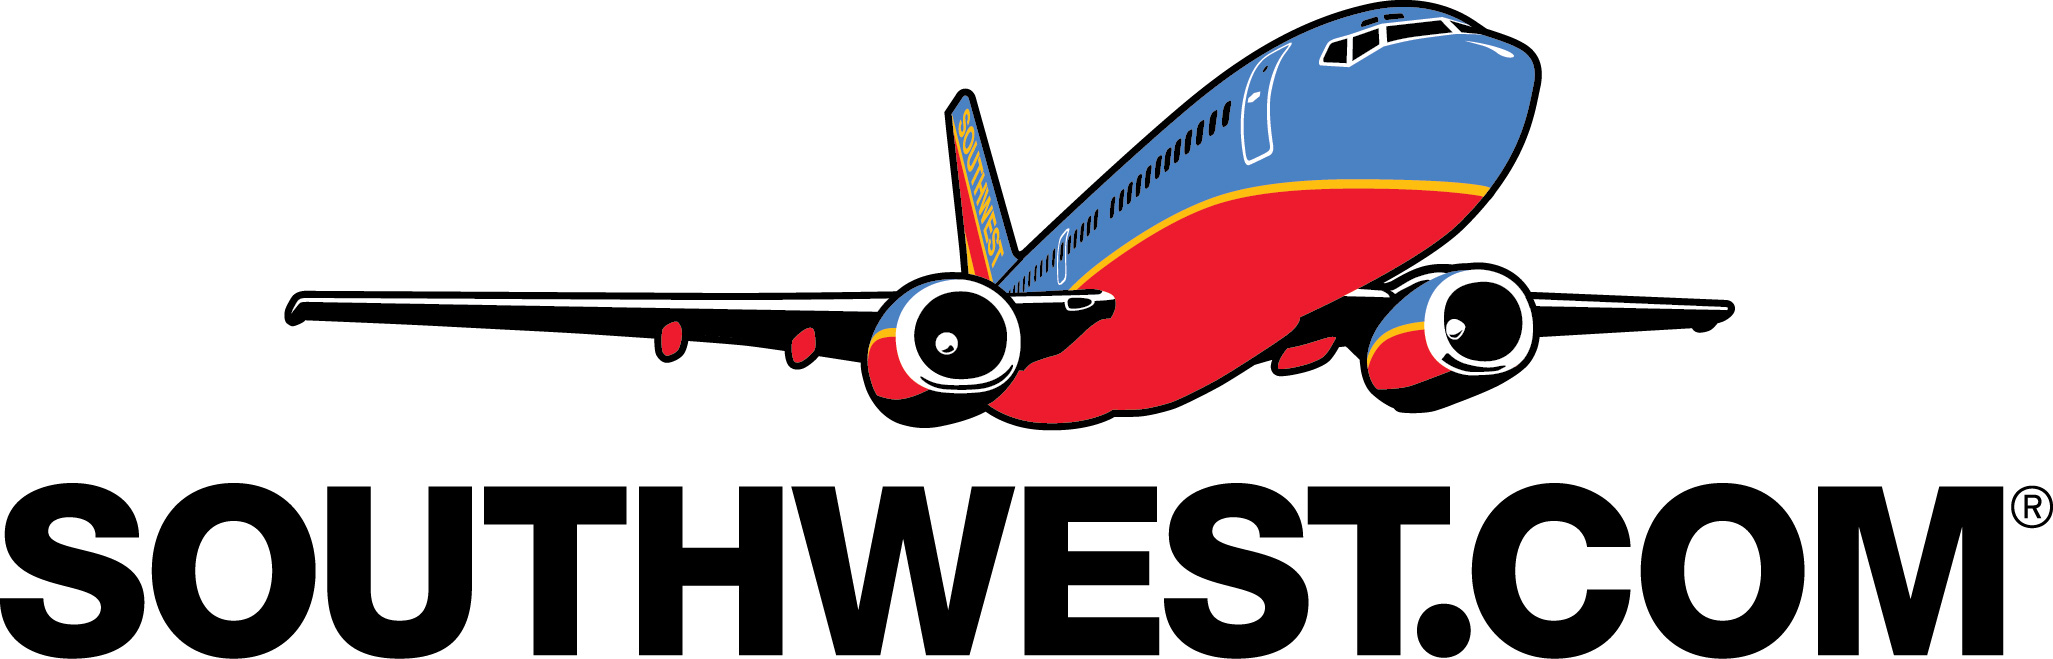 Southwest Airlines logo 08